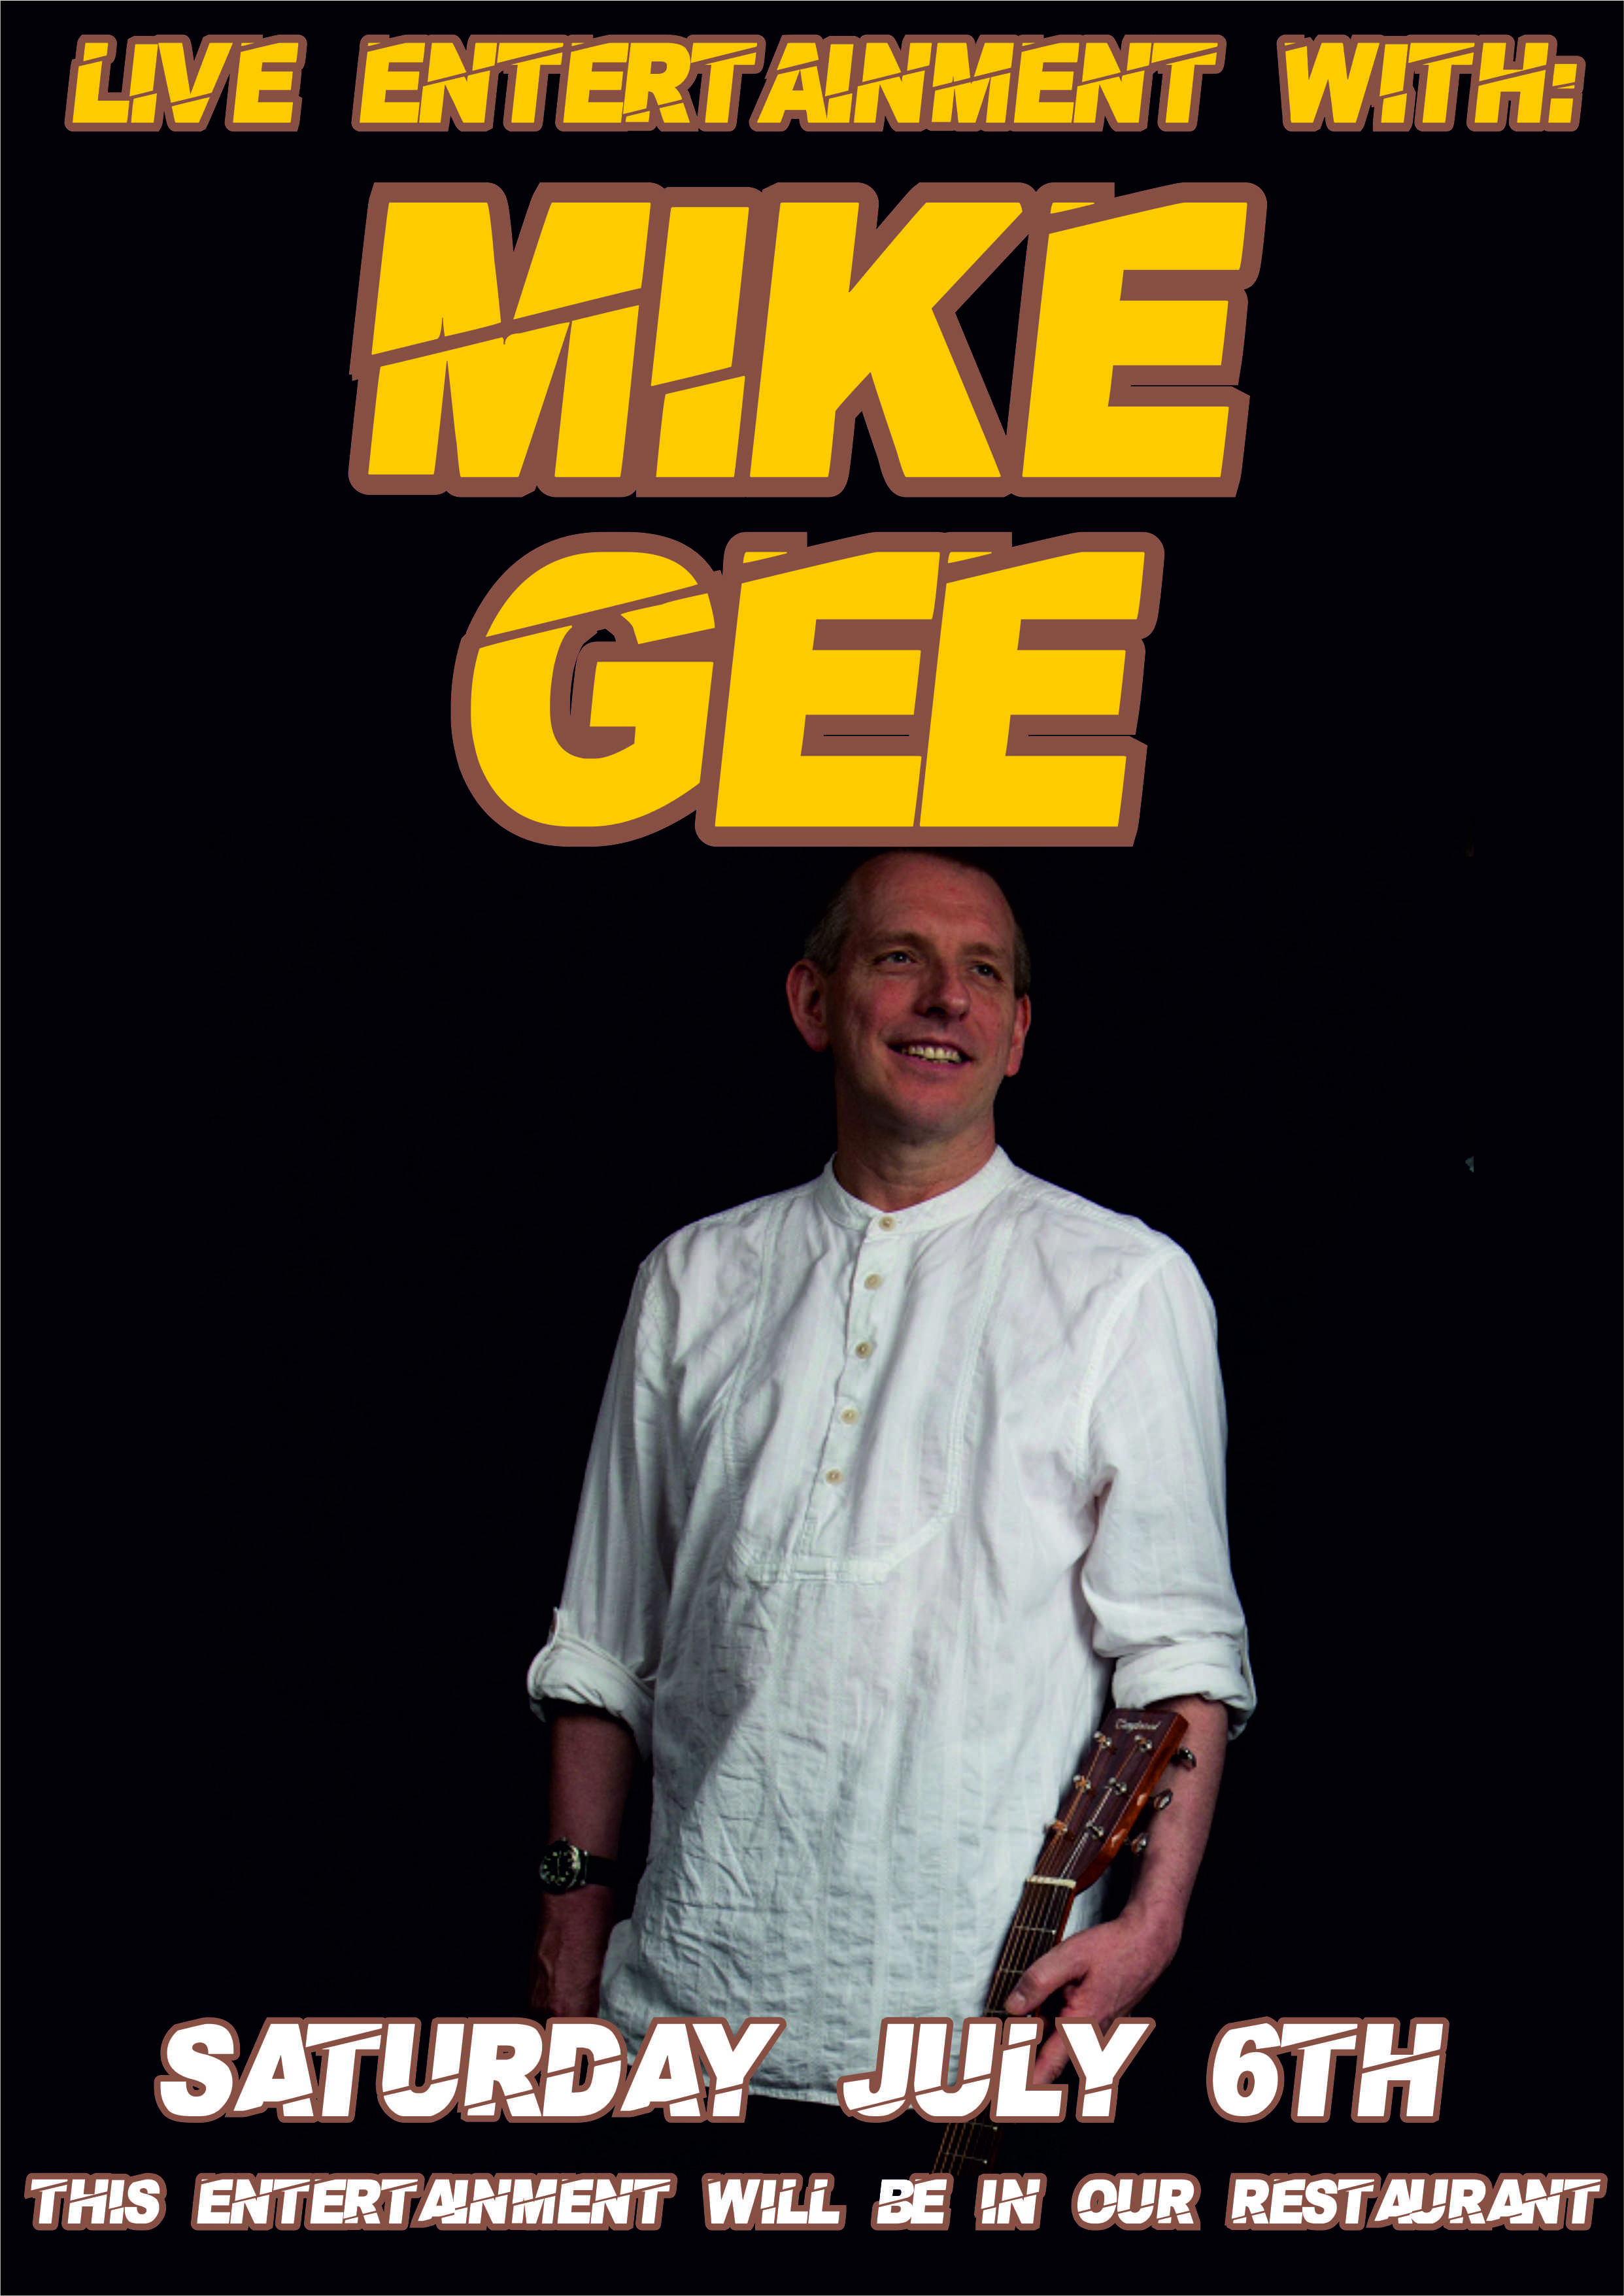 Live Entertainment with Mike Gee